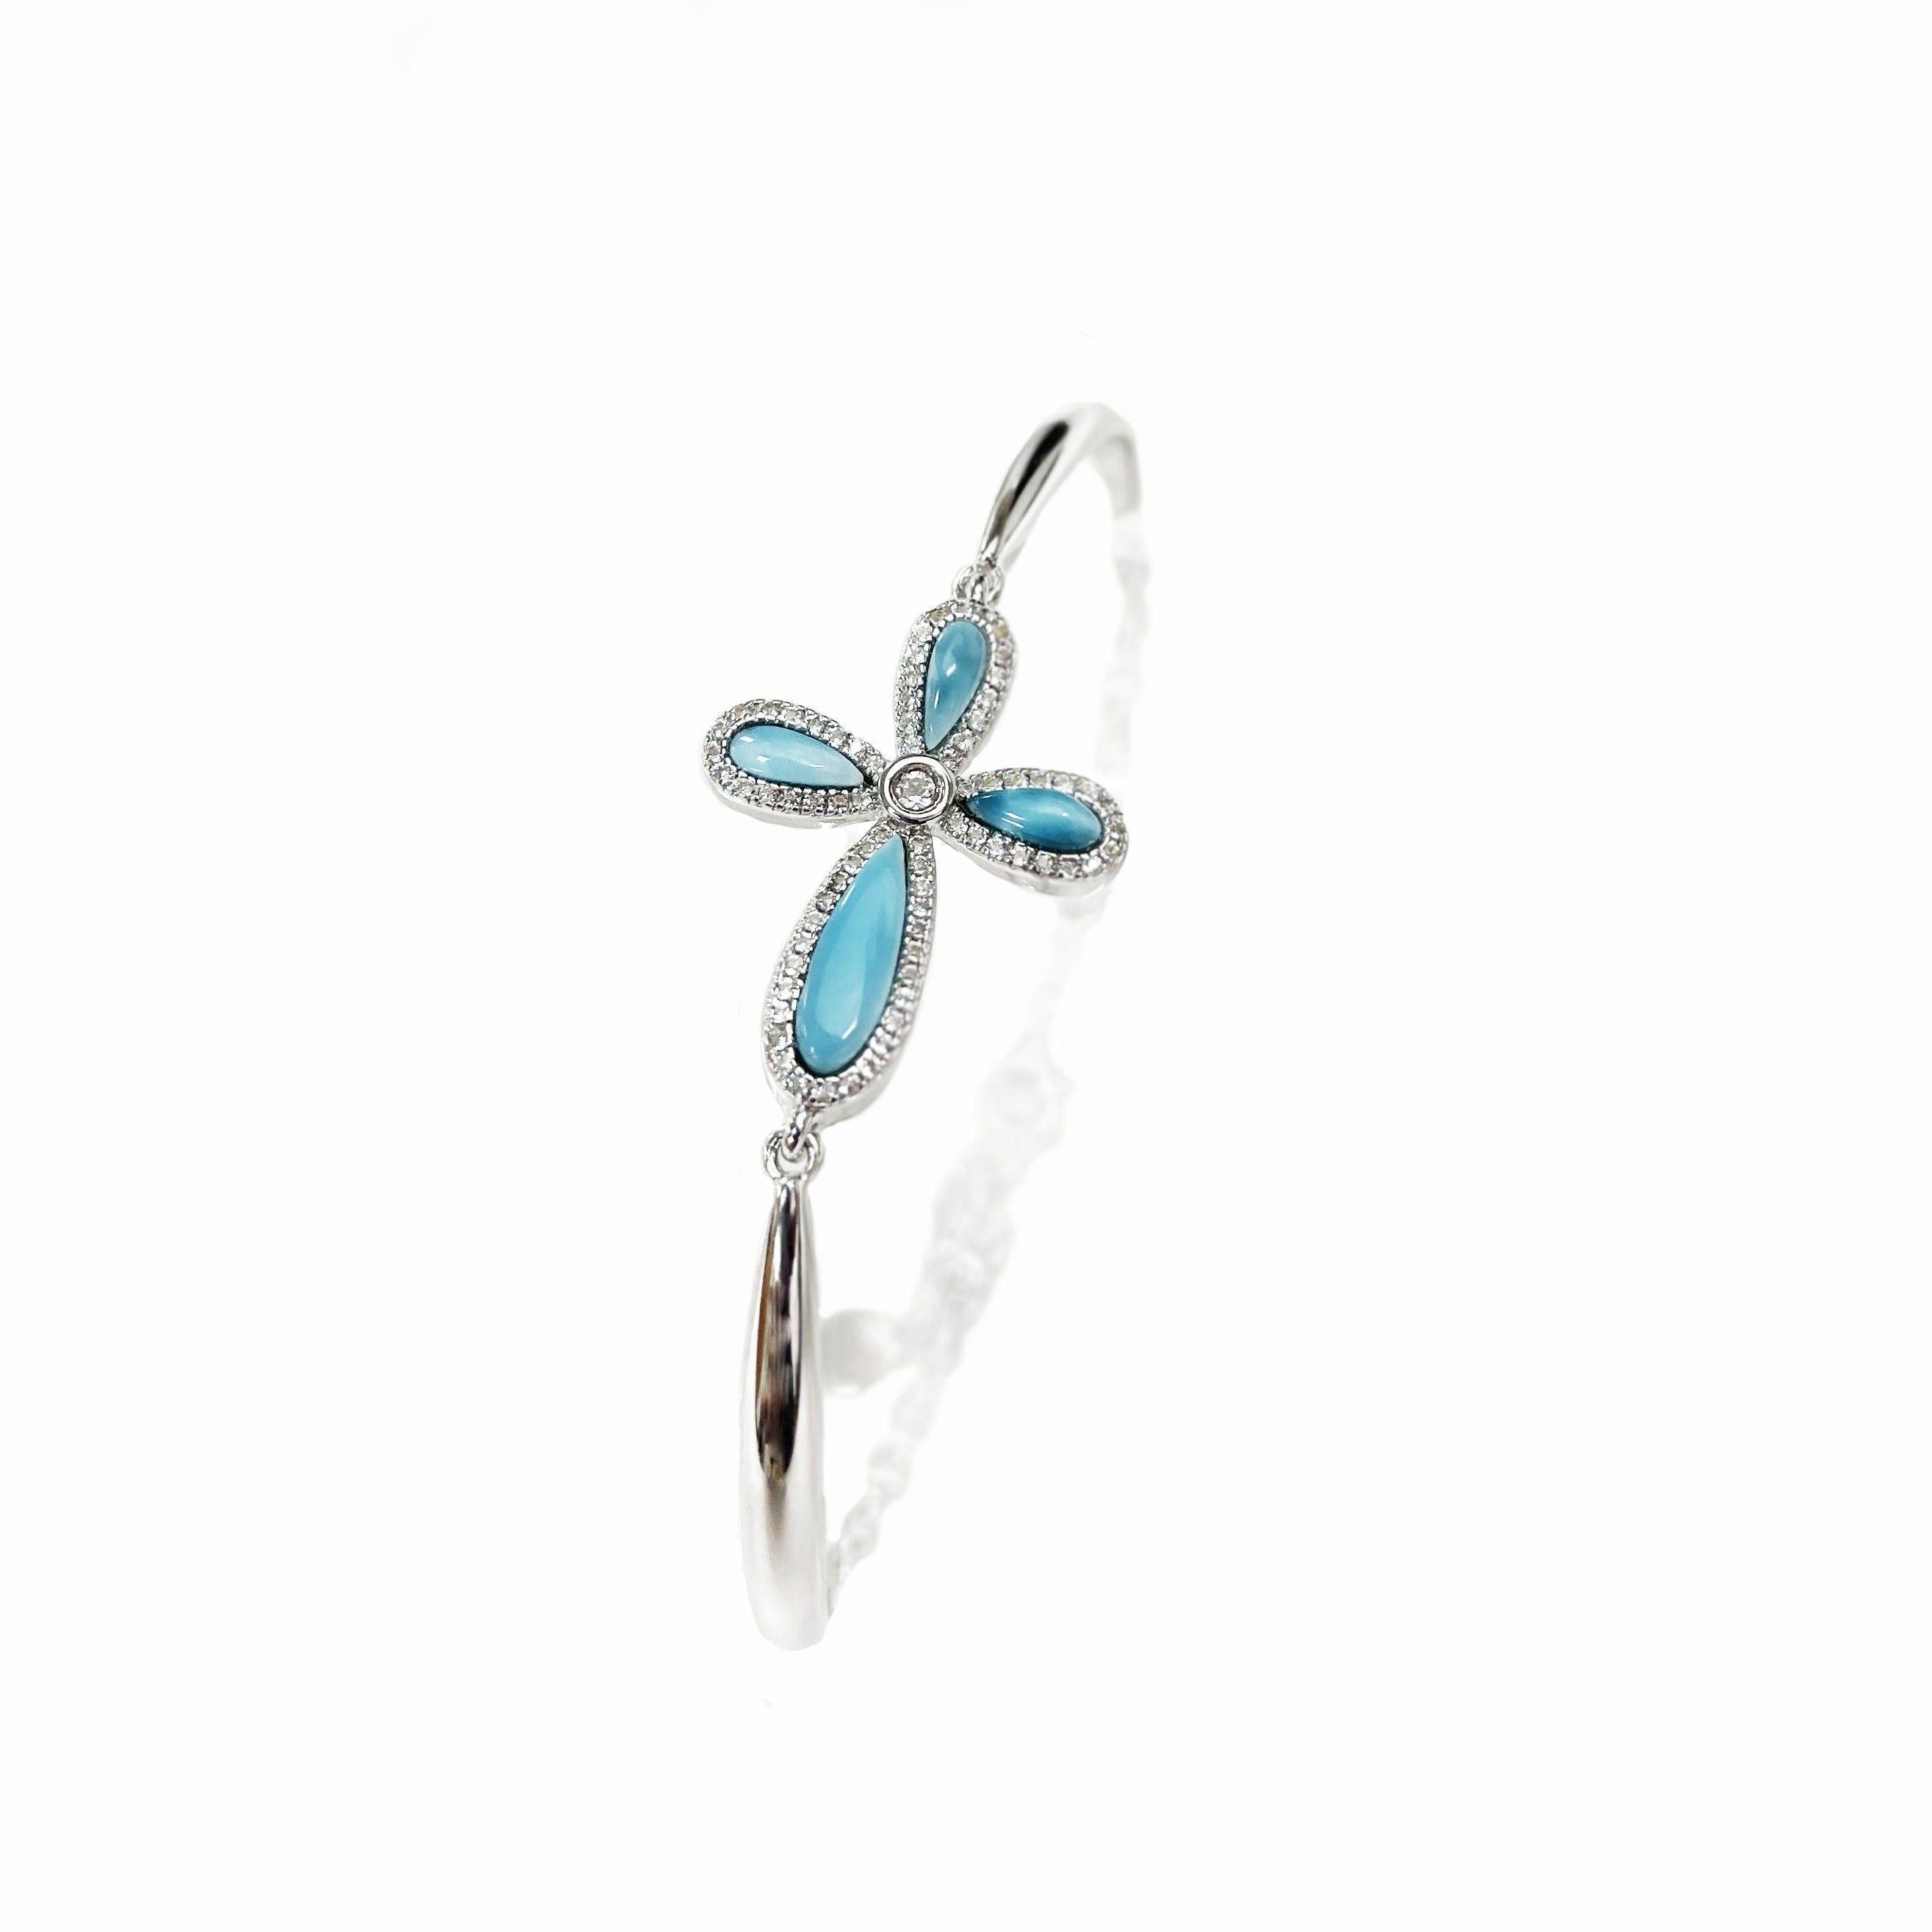 The picture shows a 925 sterling silver larimar cross bracelet and topaz.